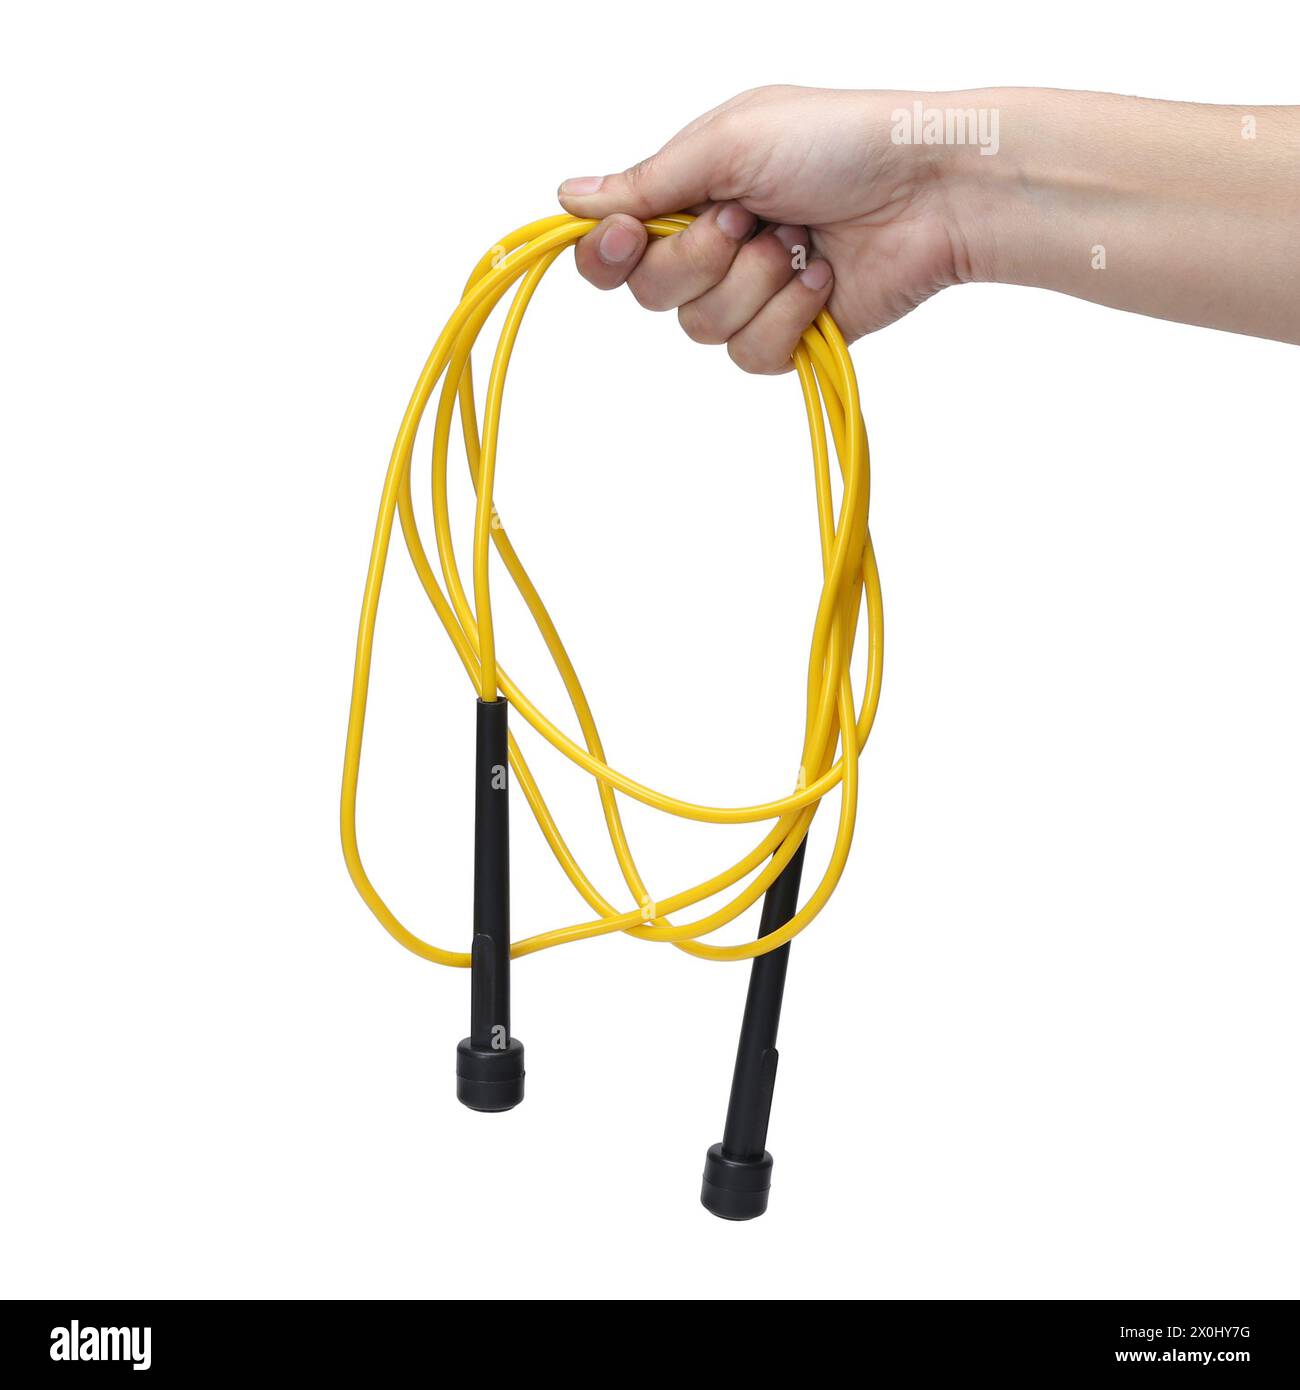 yellow black skipping rope hold in hand isolated on white background Stock Photo